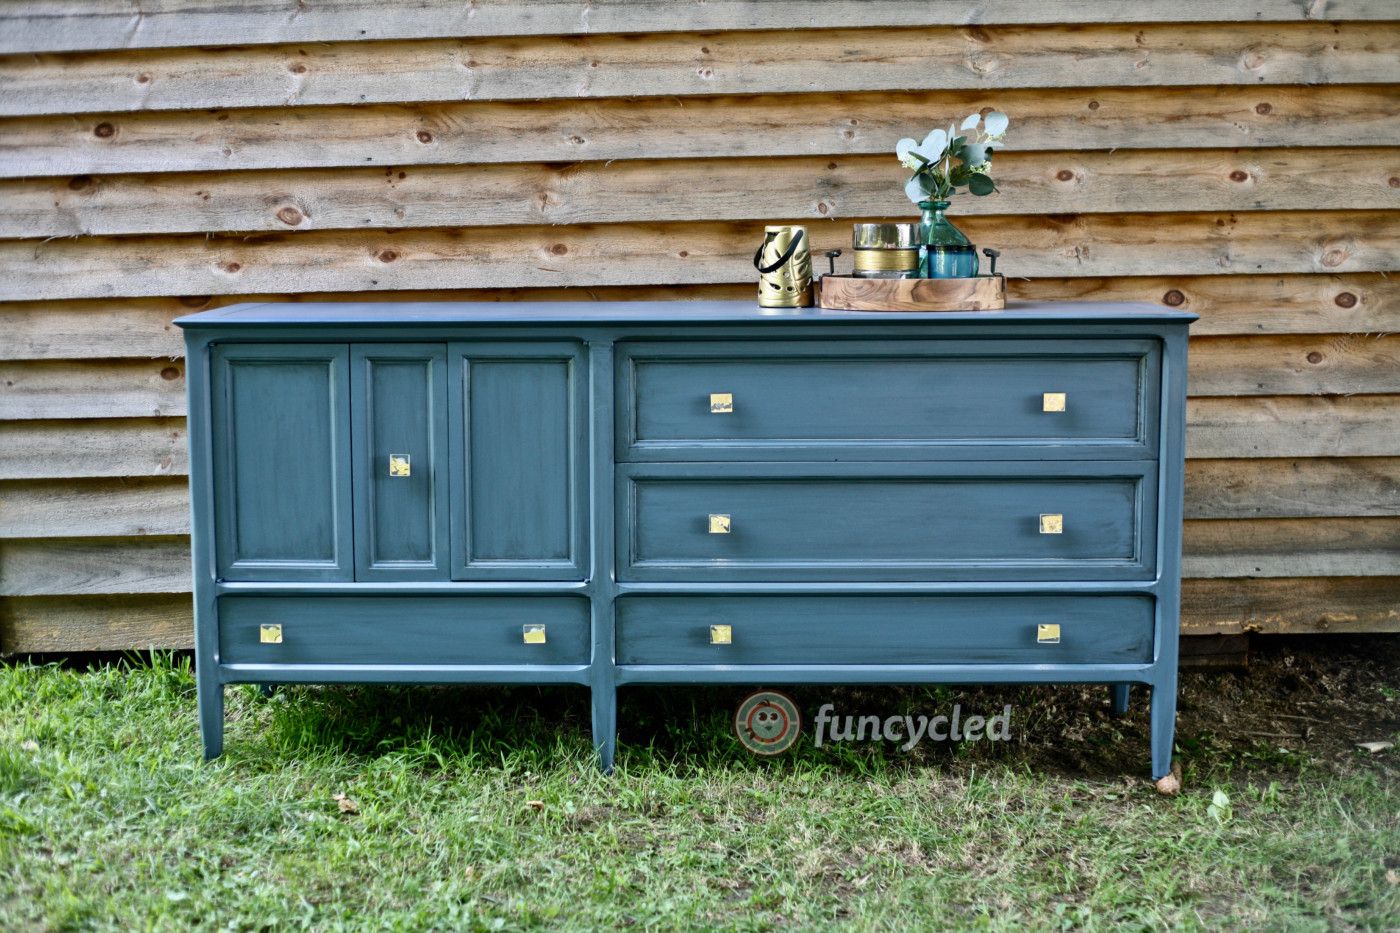 Blog – Funcycled Intended For Botanical Harmony Credenzas (View 27 of 30)